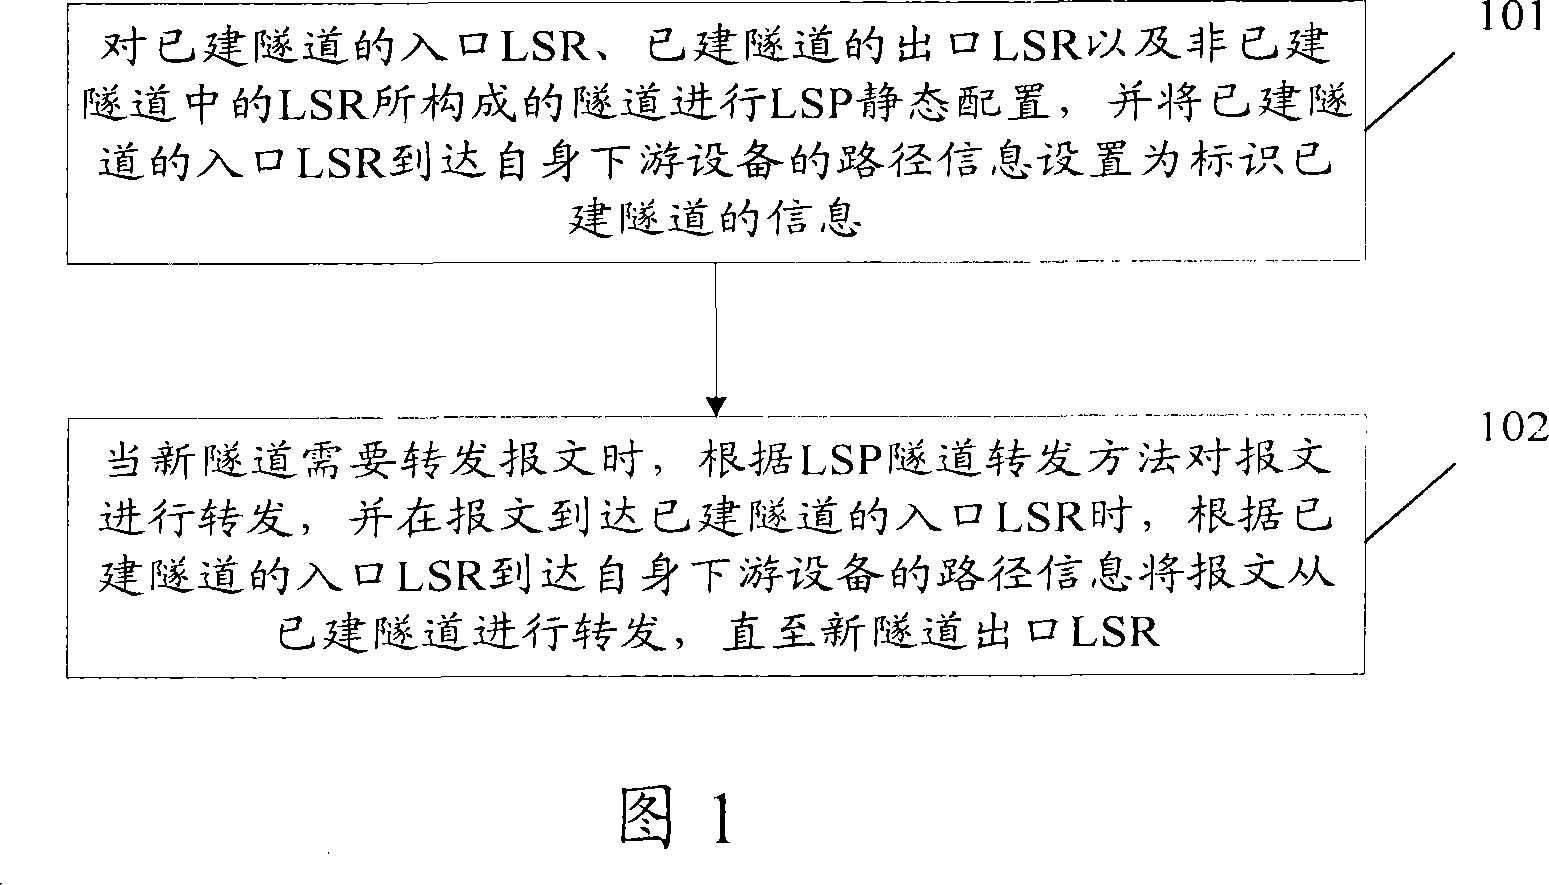 Tunnel-based message forwarding method and label exchange router